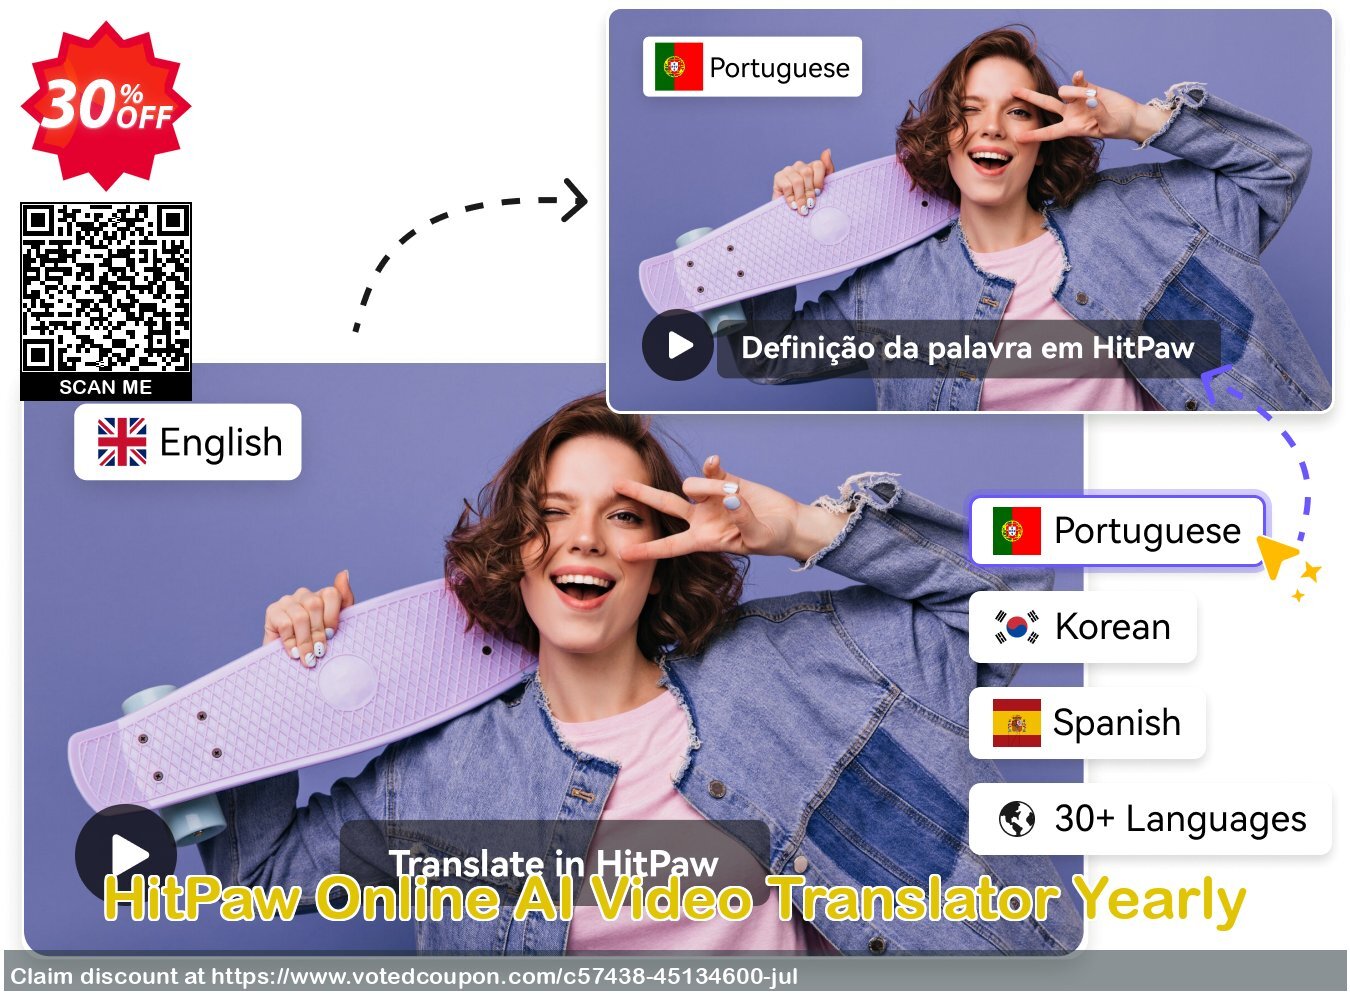 HitPaw Online AI Video Translator Yearly voted-on promotion codes